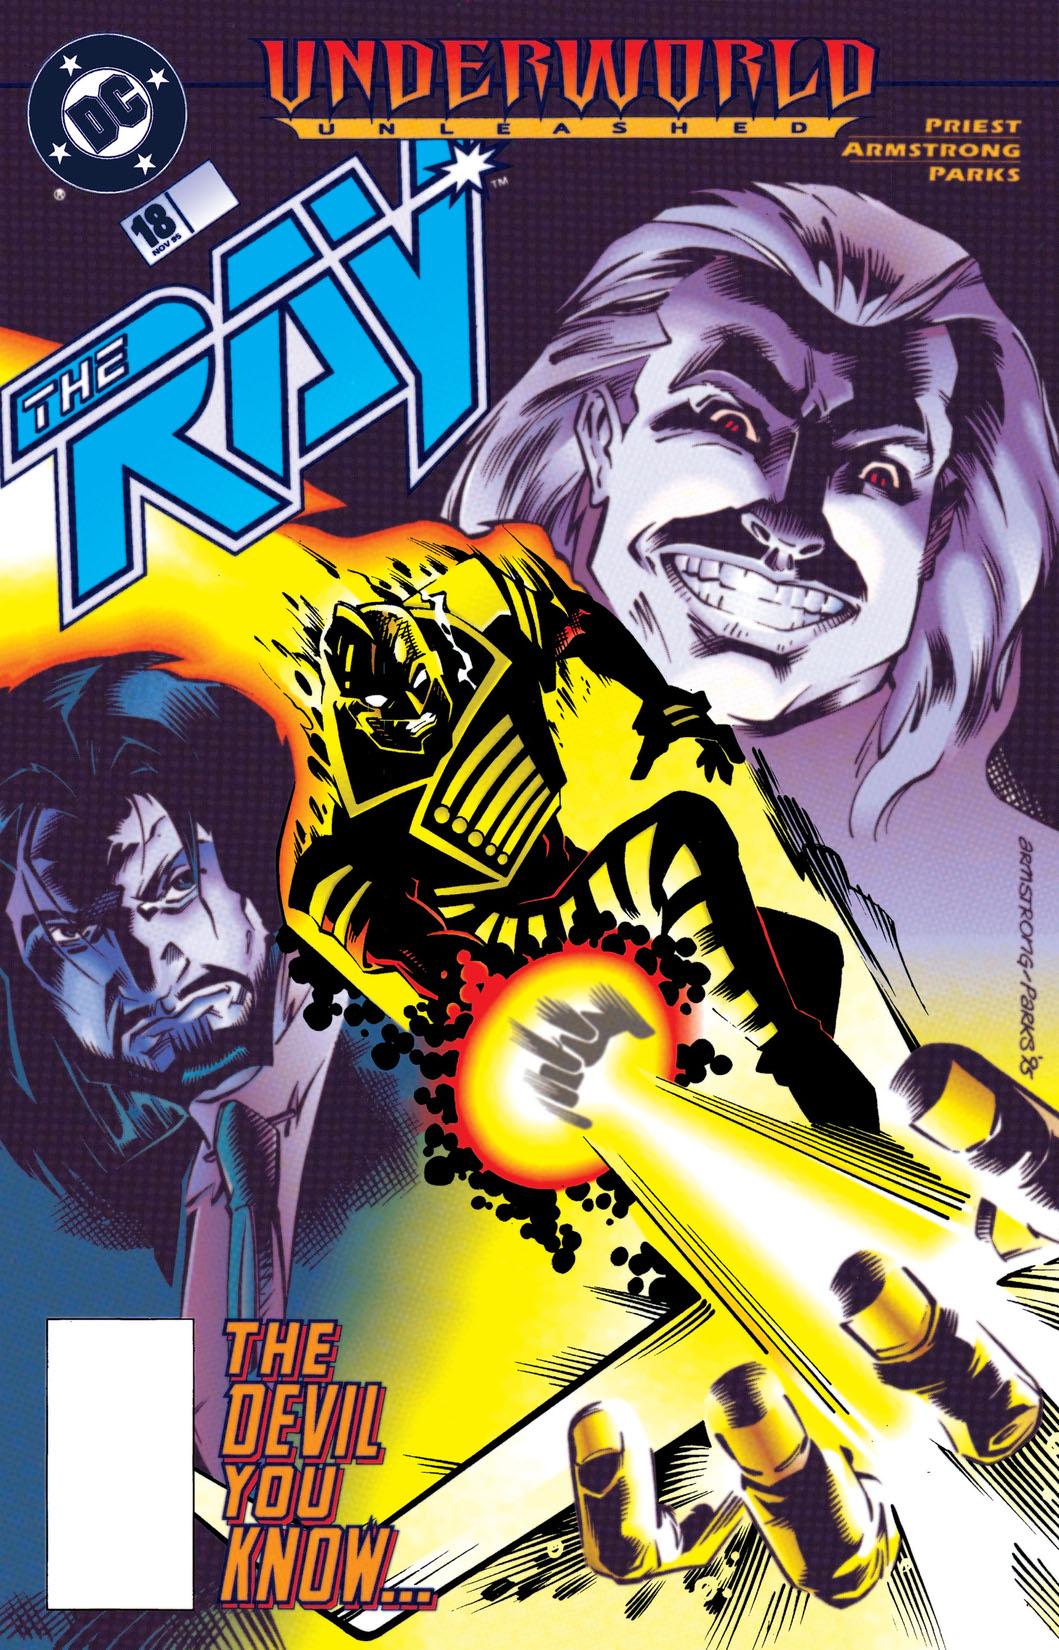 The Ray (1994-) #18 preview images